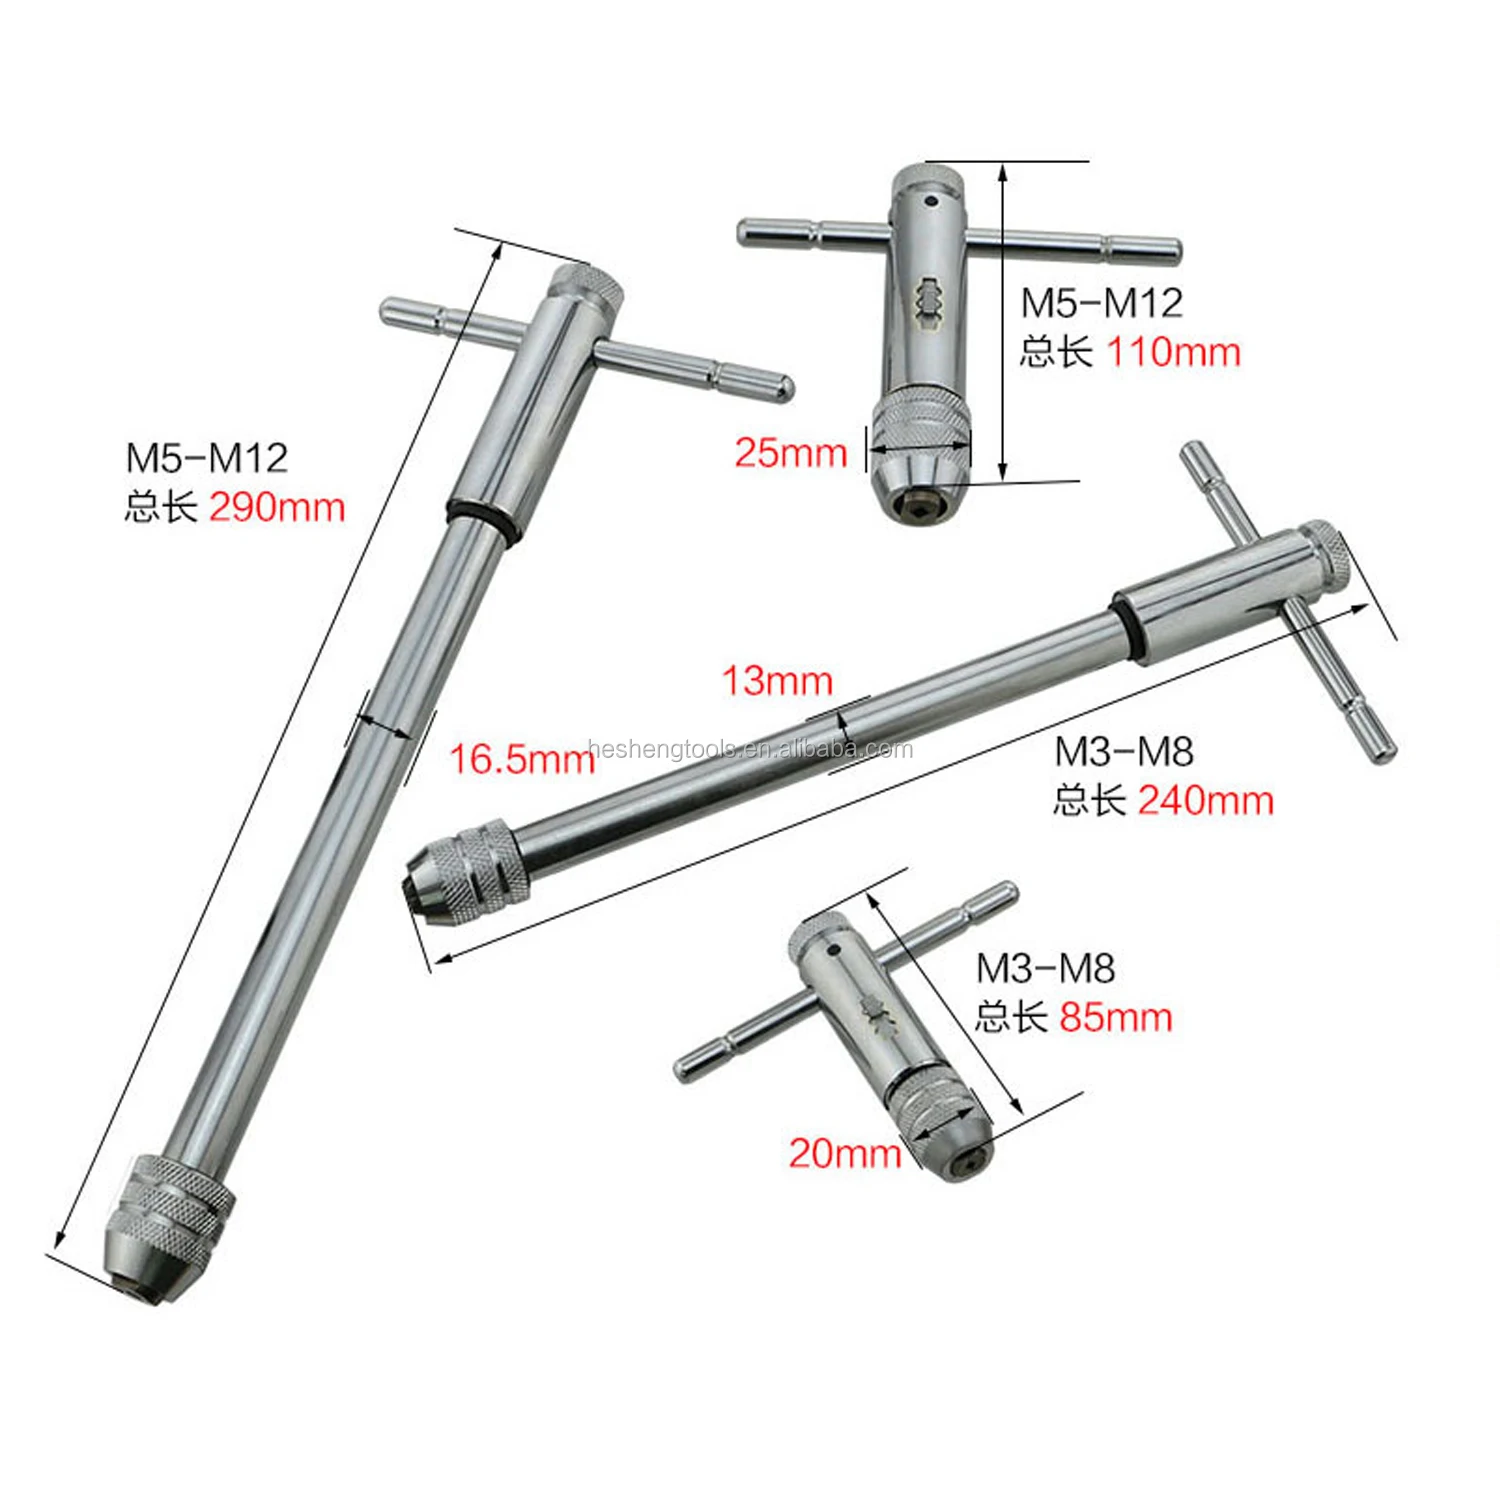 M12 Forward and Reverse 110mm T Type Ratchet Tap Wrench Sizes M5 